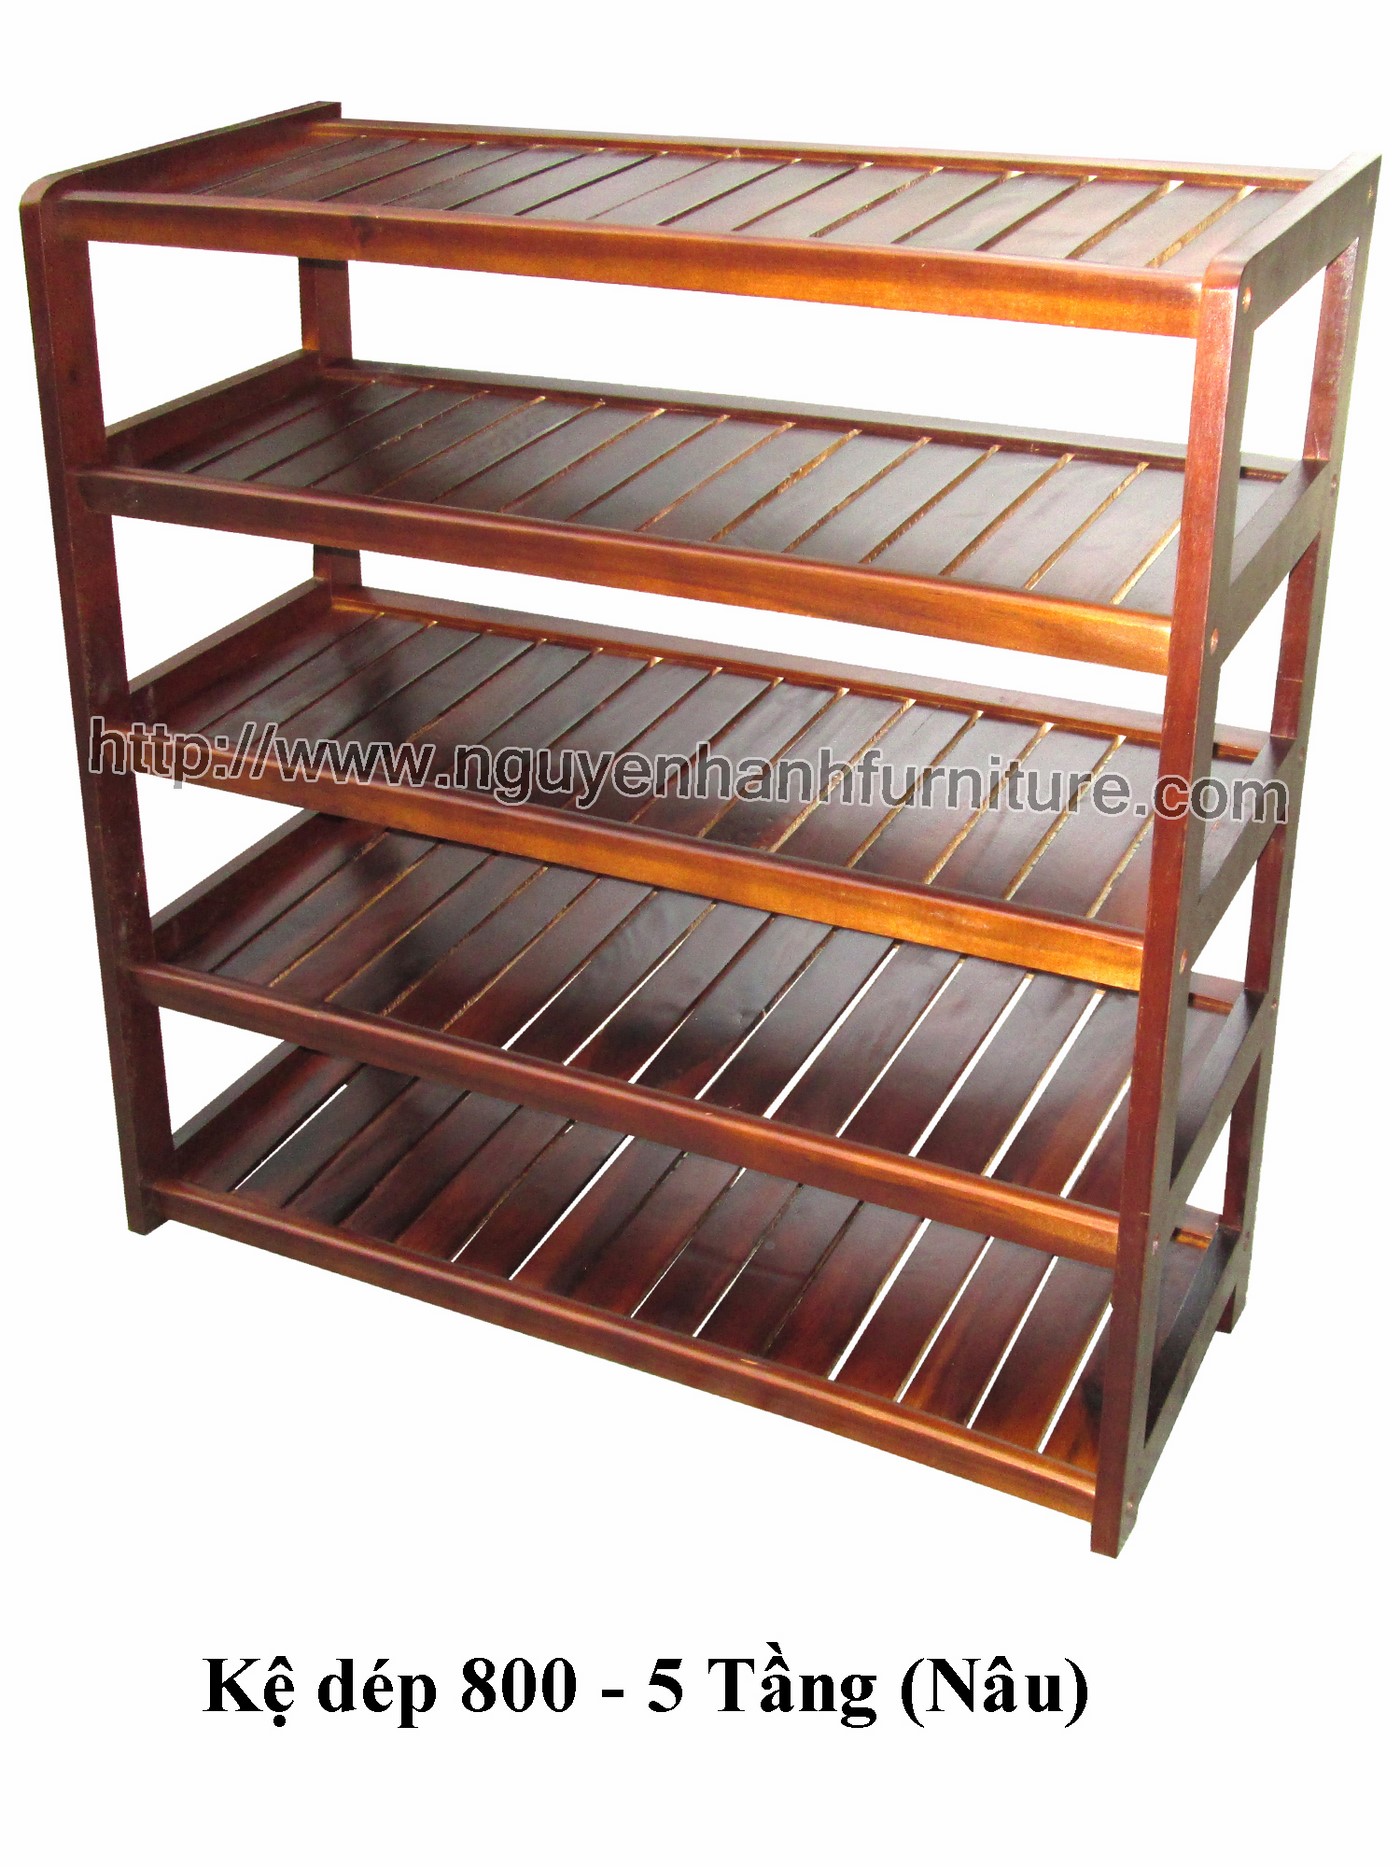 Name product: Shoeshelf 5 Floors 80 with sparse blades (Brown)- Dimensions: 80 x 30 x 82 (H) - Description: Wood natural rubber